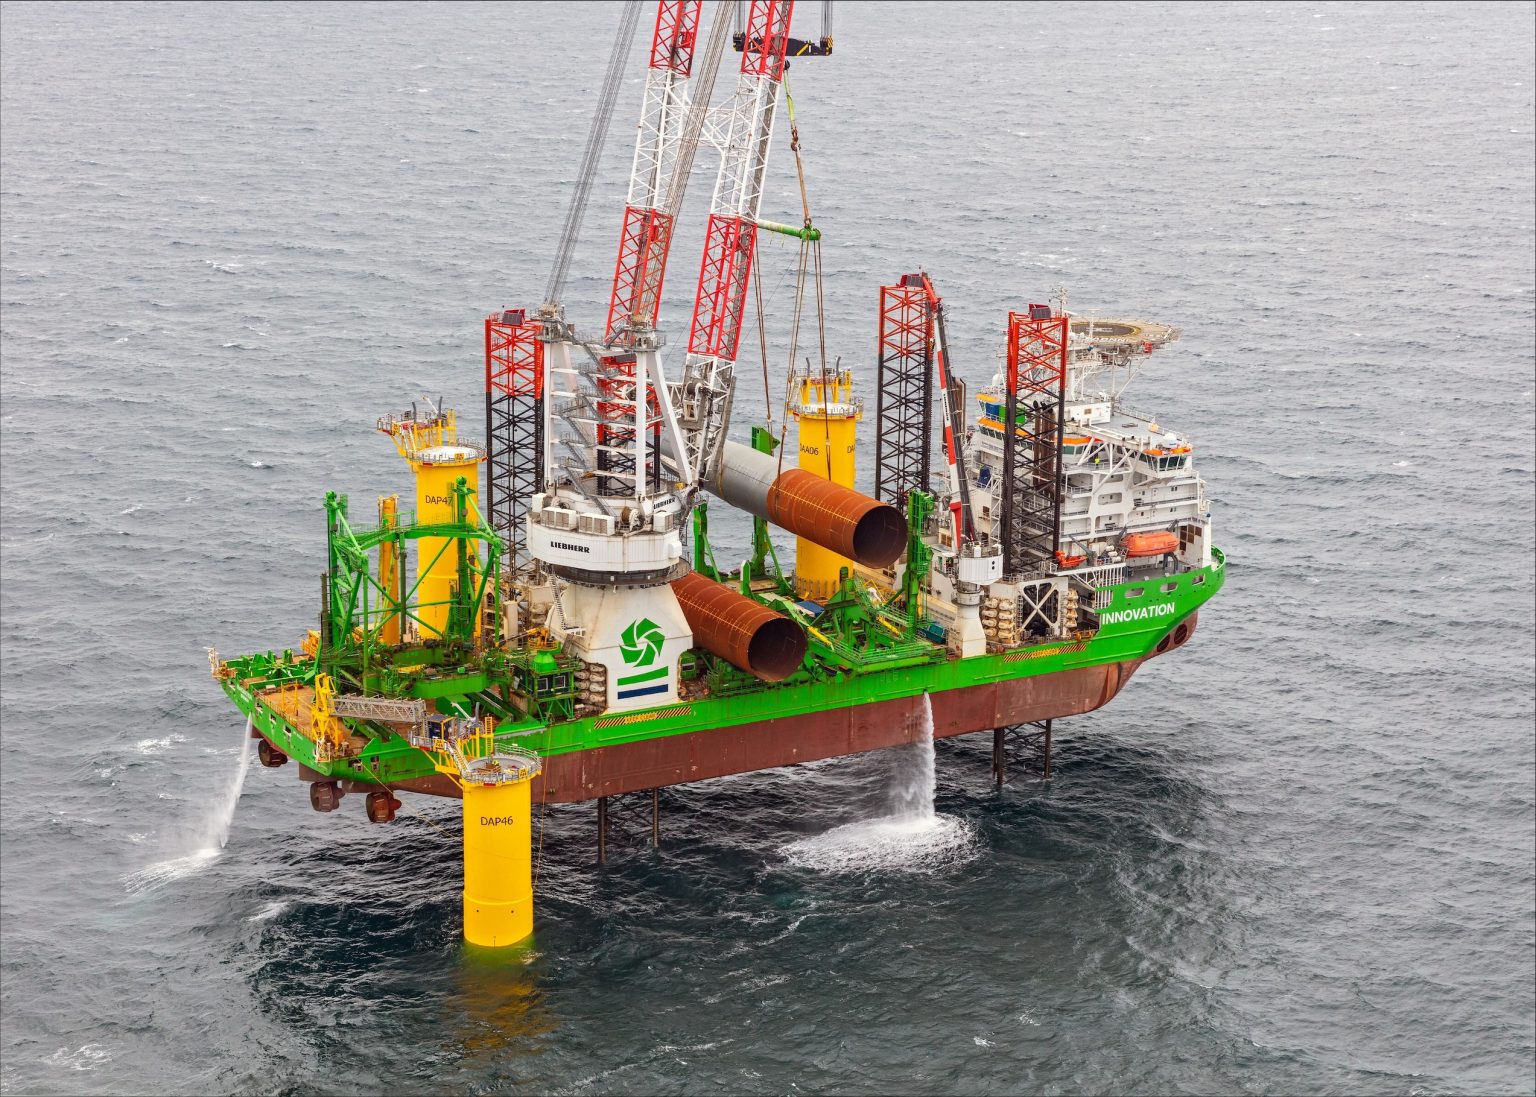 Campaign begins to install 277 turbine foundation monopiles and transition pieces across three phases of Dogger Bank Wind Farm